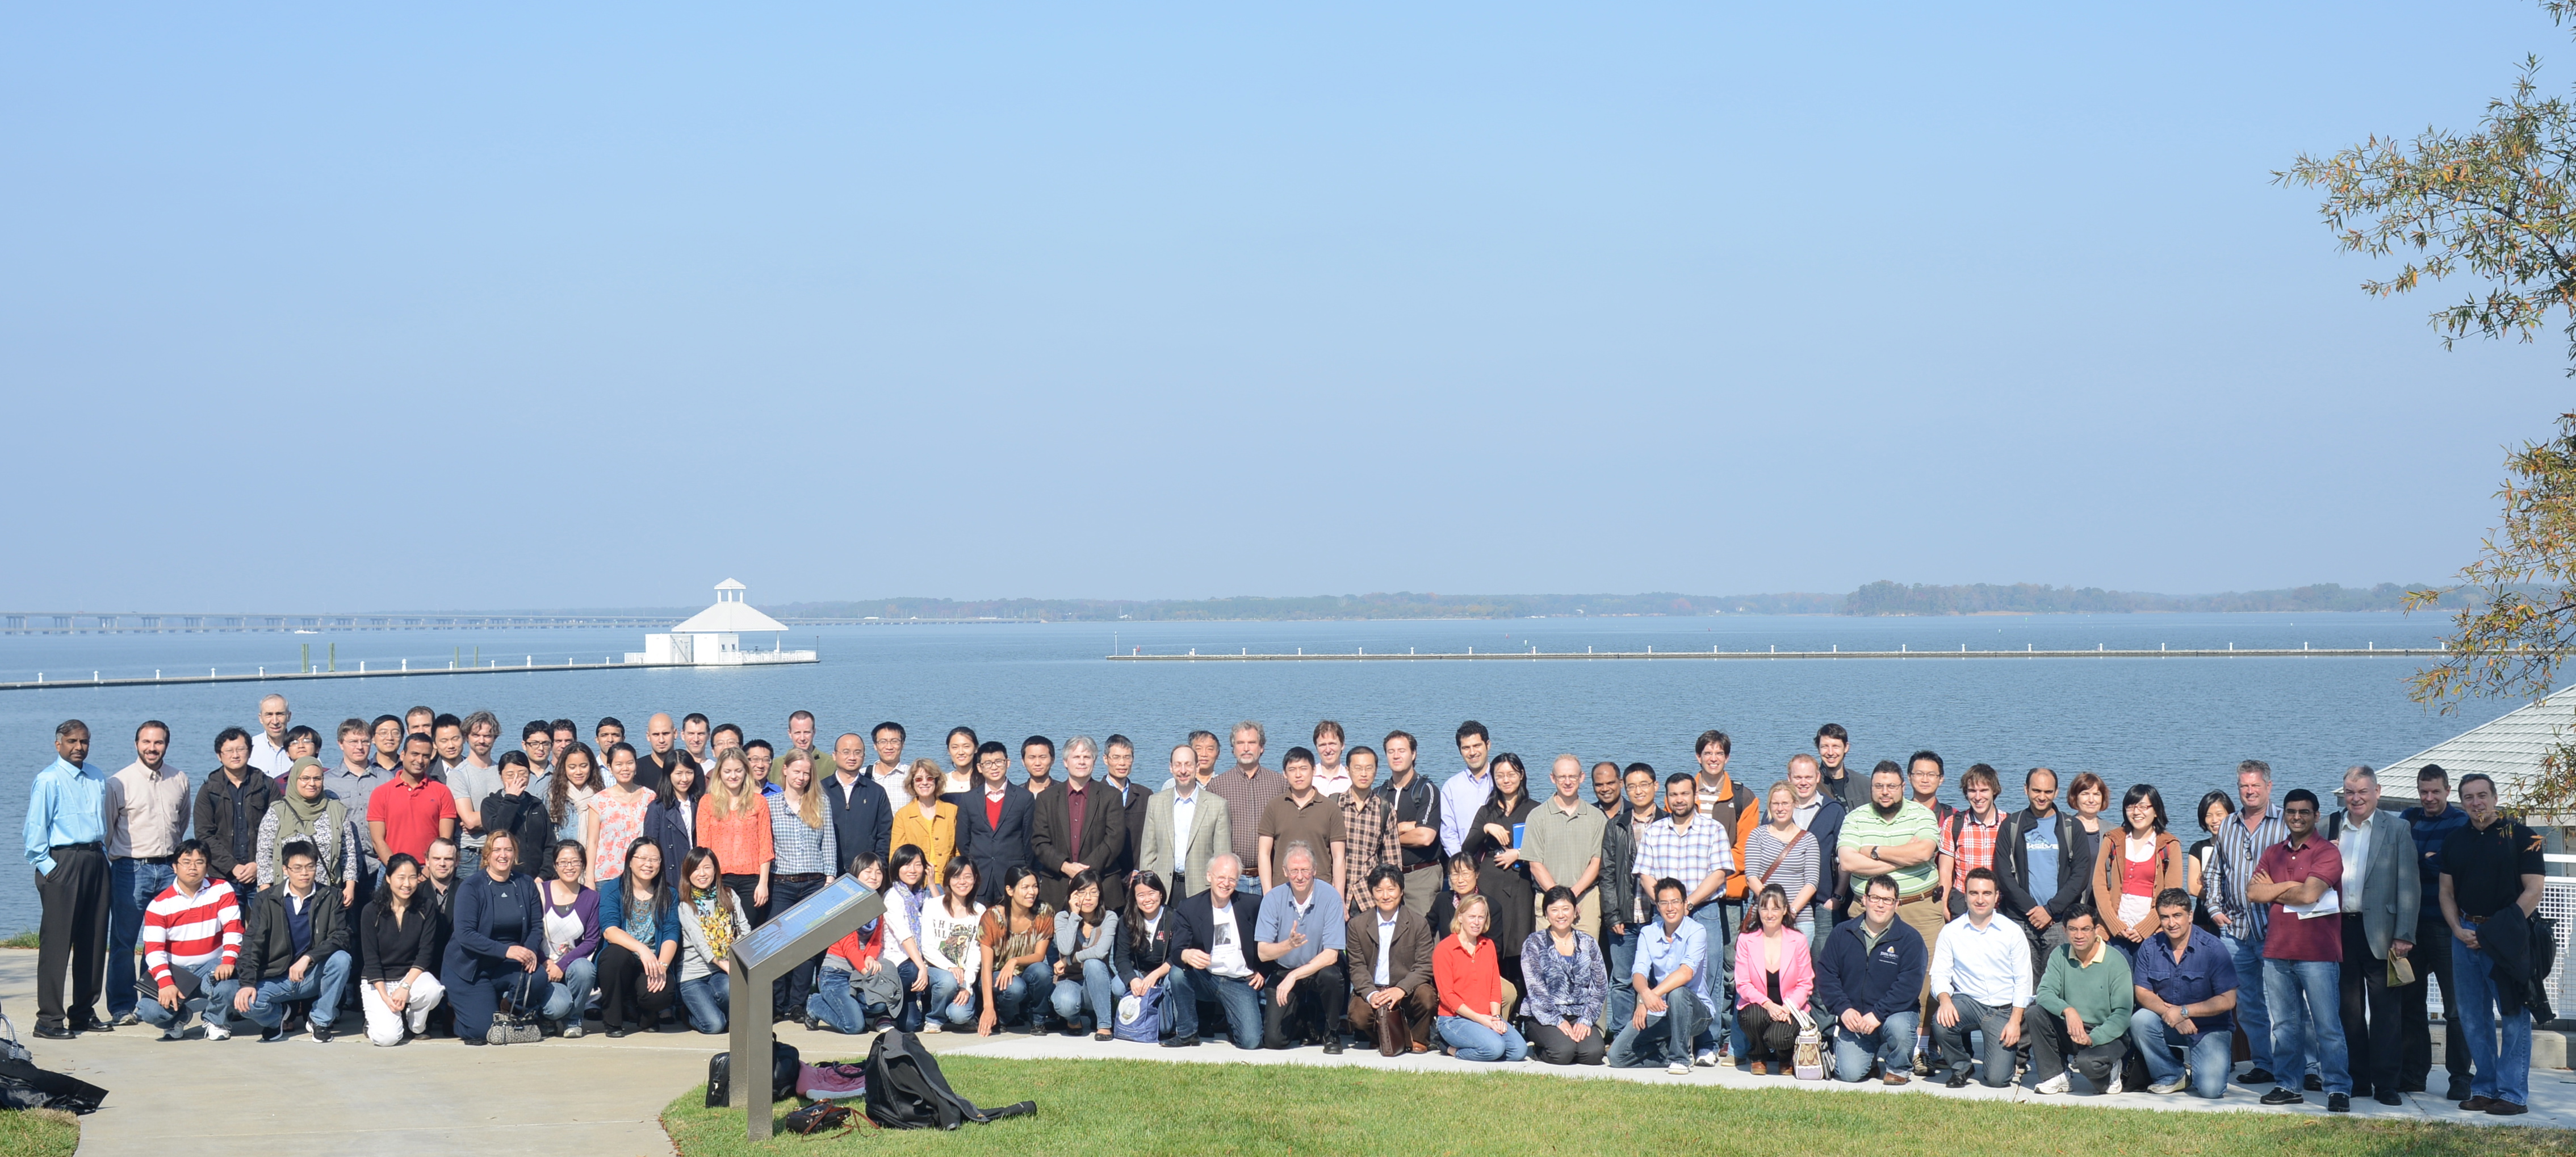 radiology group poses in front of water at harbor